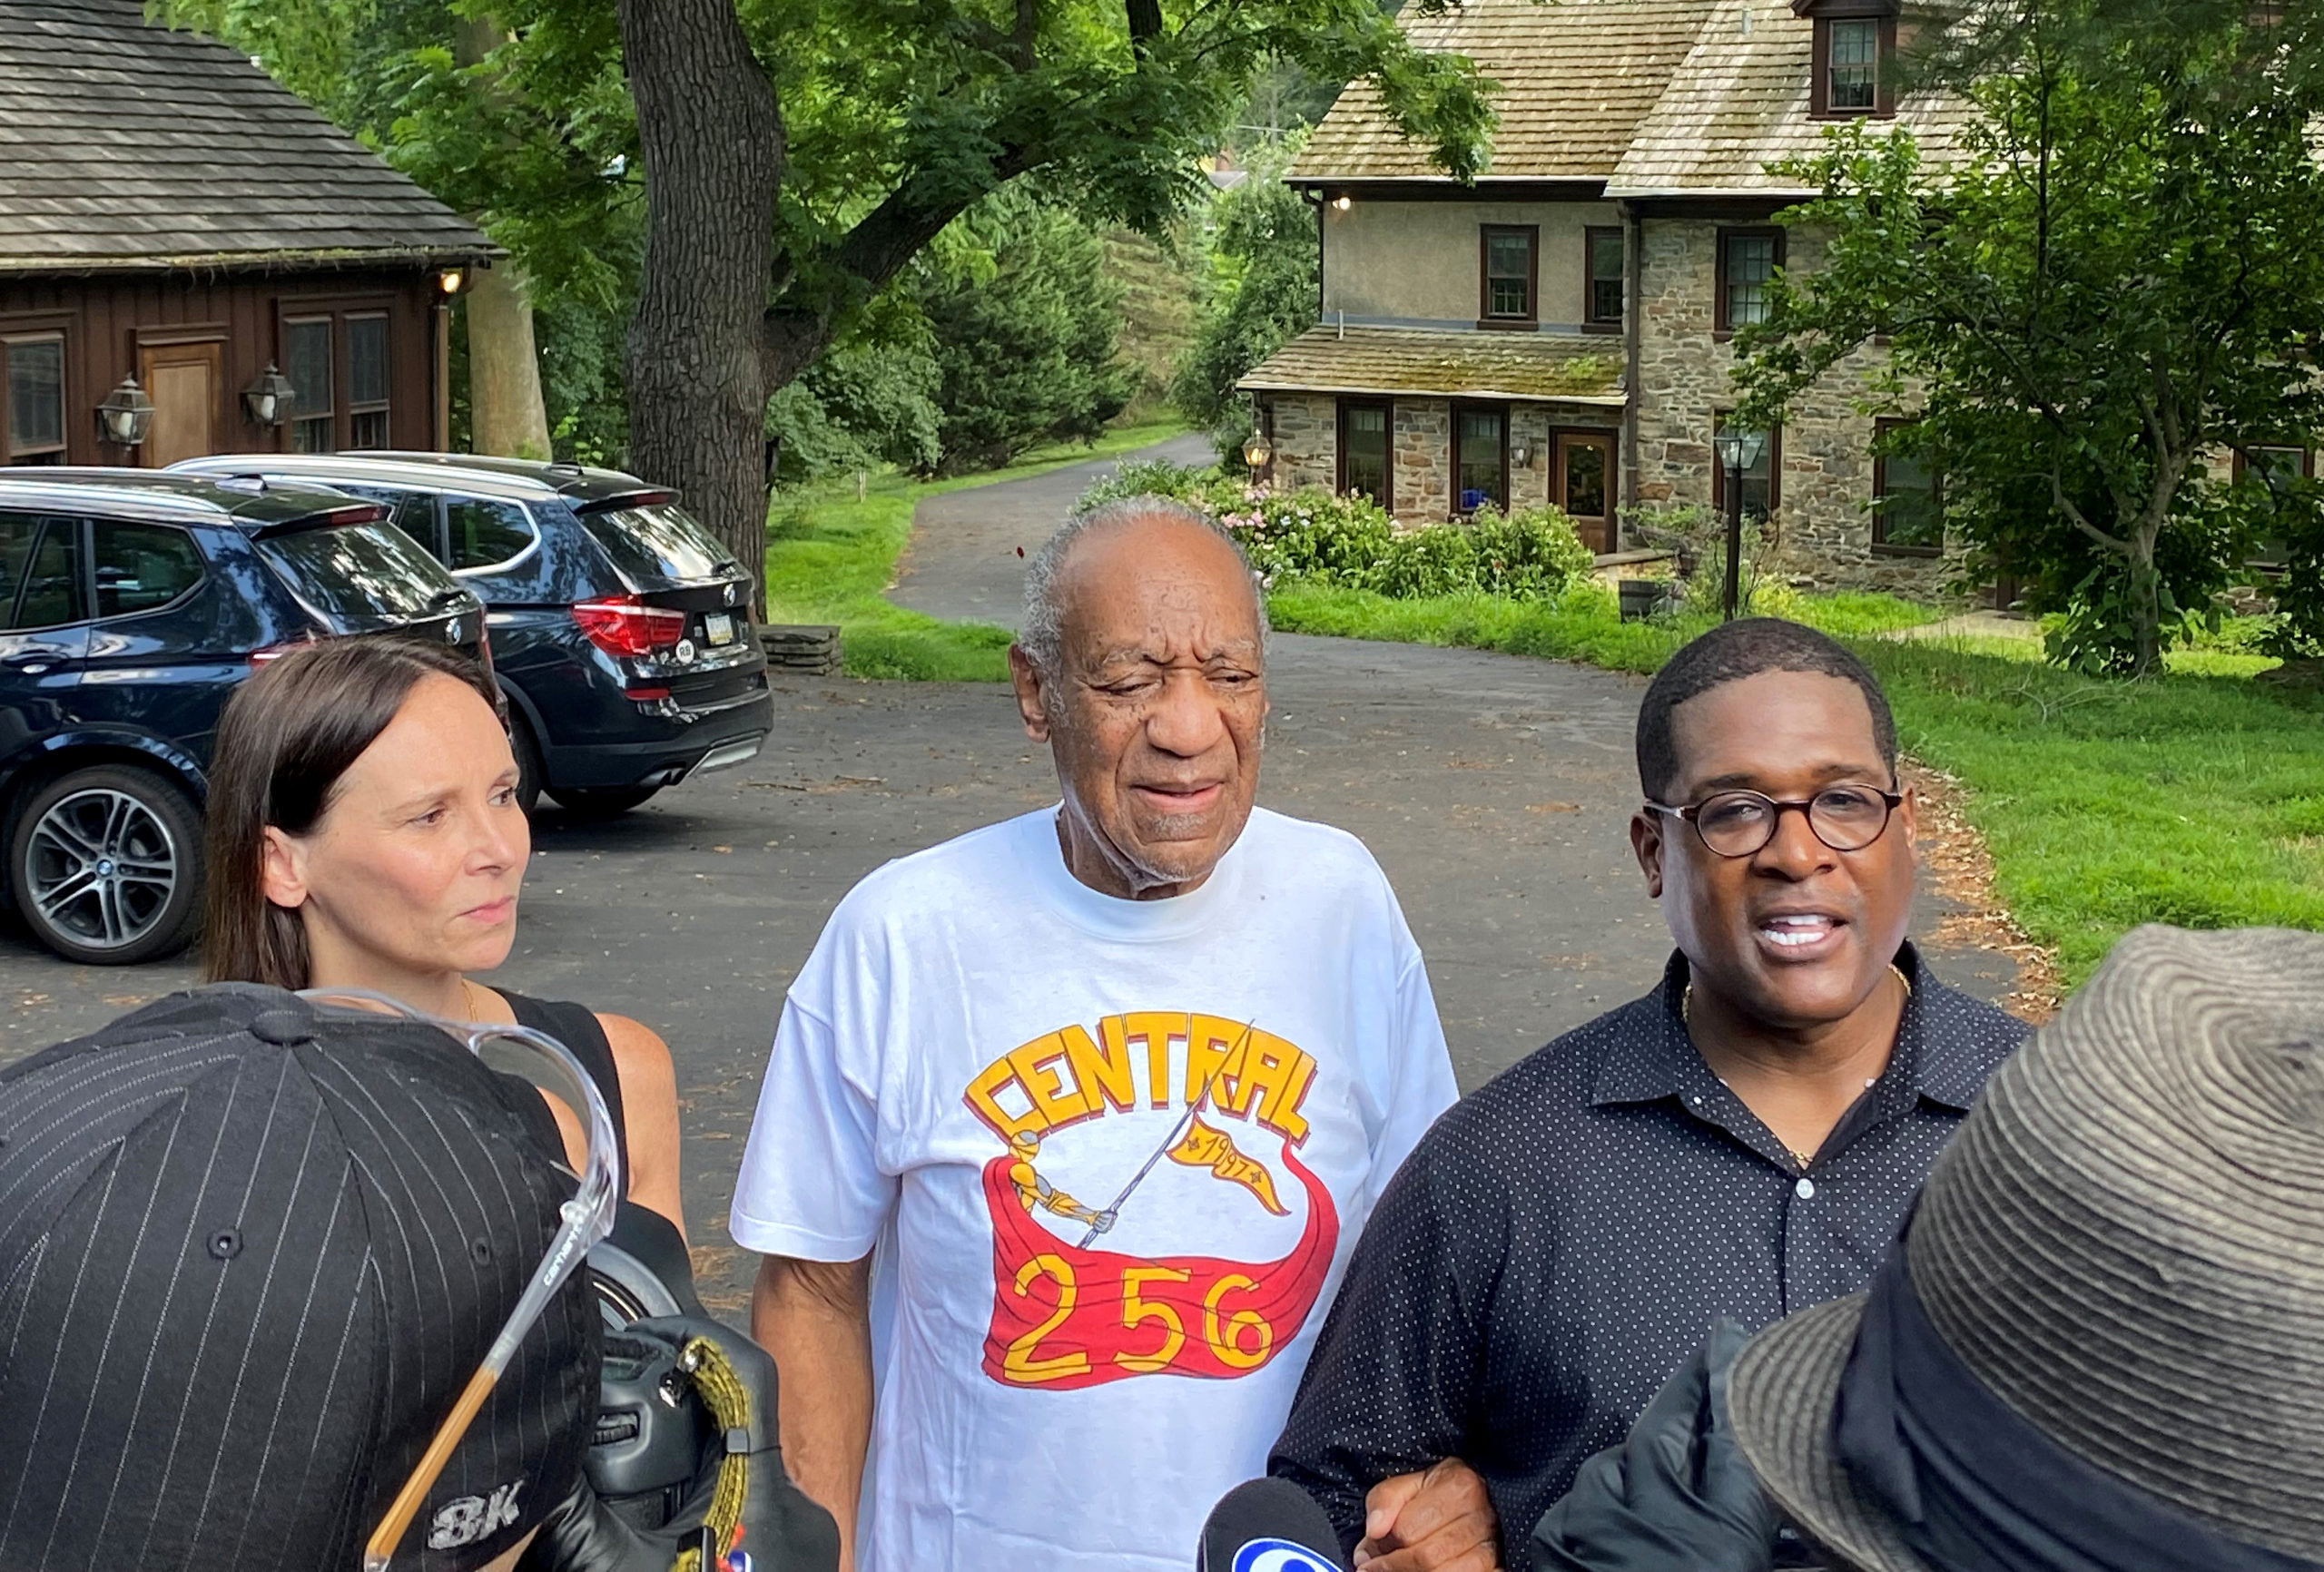 (L-R) Attorney Jennifer Bonjean, Bill Cosby, and spokesperson Andrew Wyatt speak outside of Bill Cosby's home on June 30, 2021 in Cheltenham, Pennsylvania. Bill Cosby was released from prison after court overturns his sex assault conviction. (Photo by Michael Abbott/Getty Images)